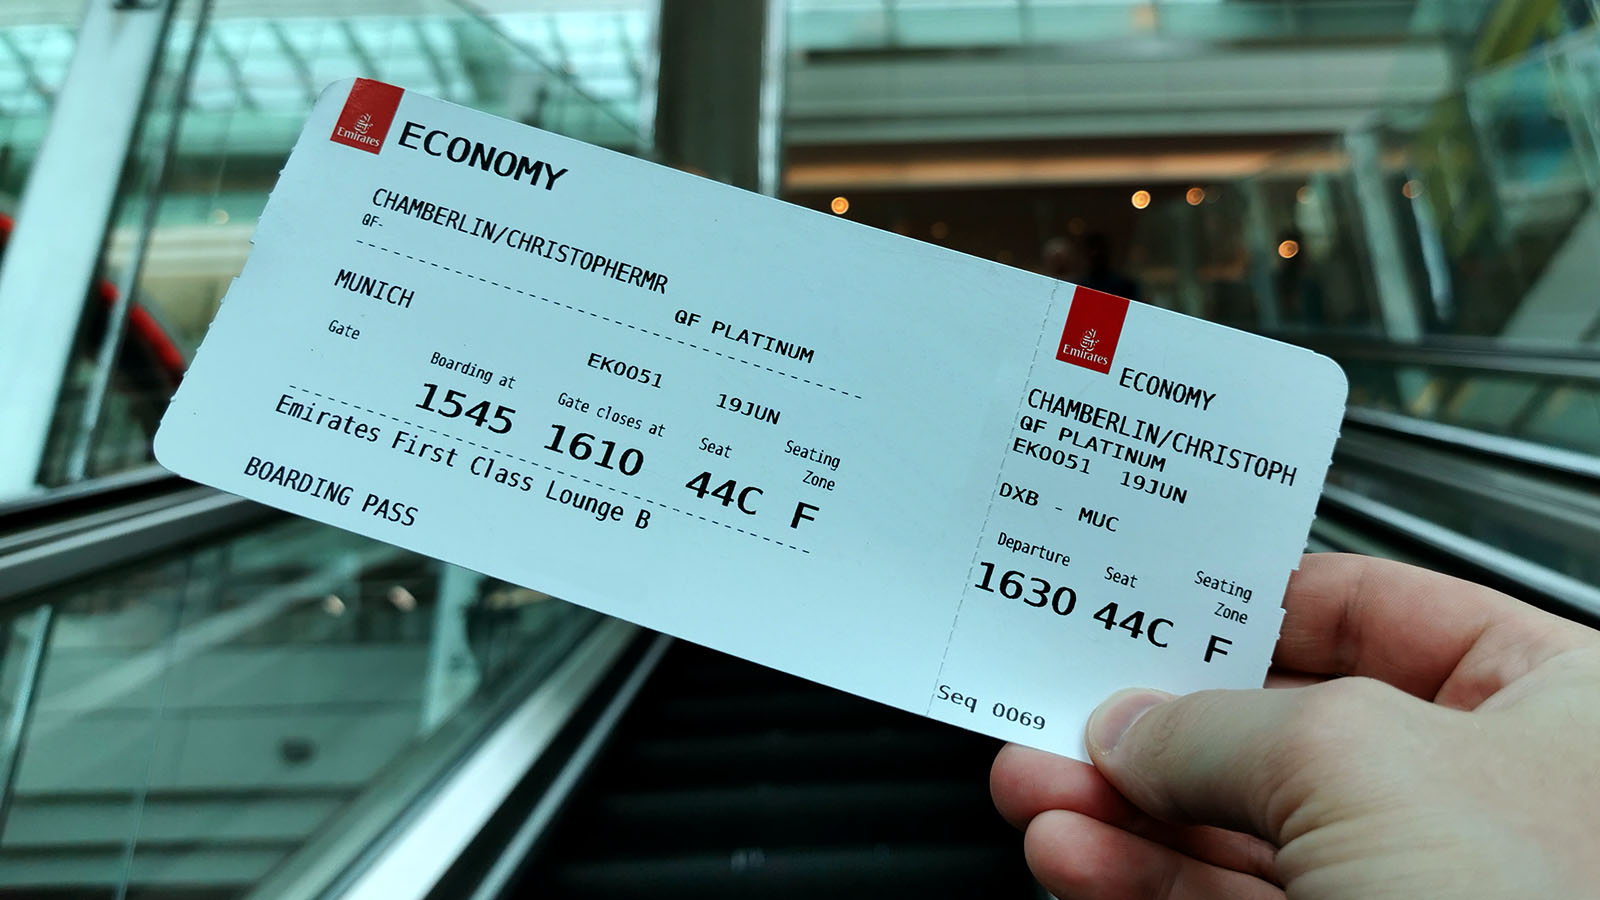 Checked in for Emirates Airbus A380 Economy